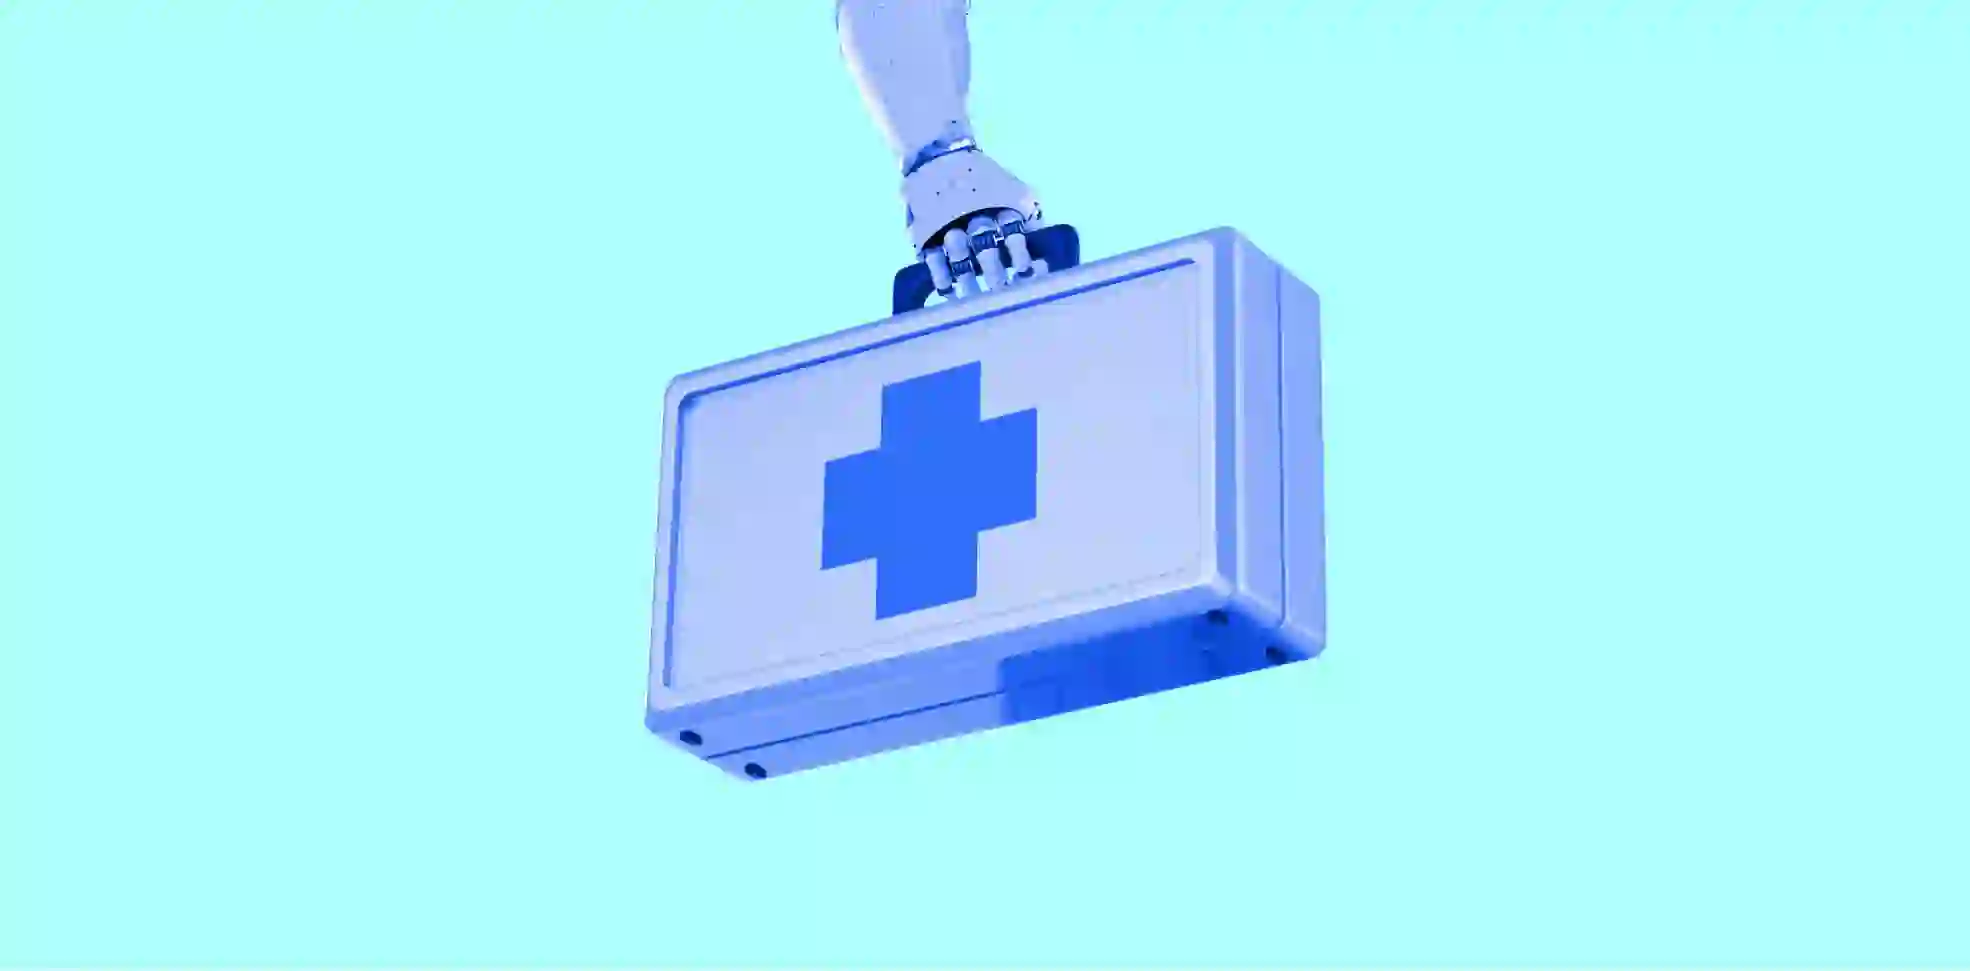 robot hand holding first aid kit on aqua background